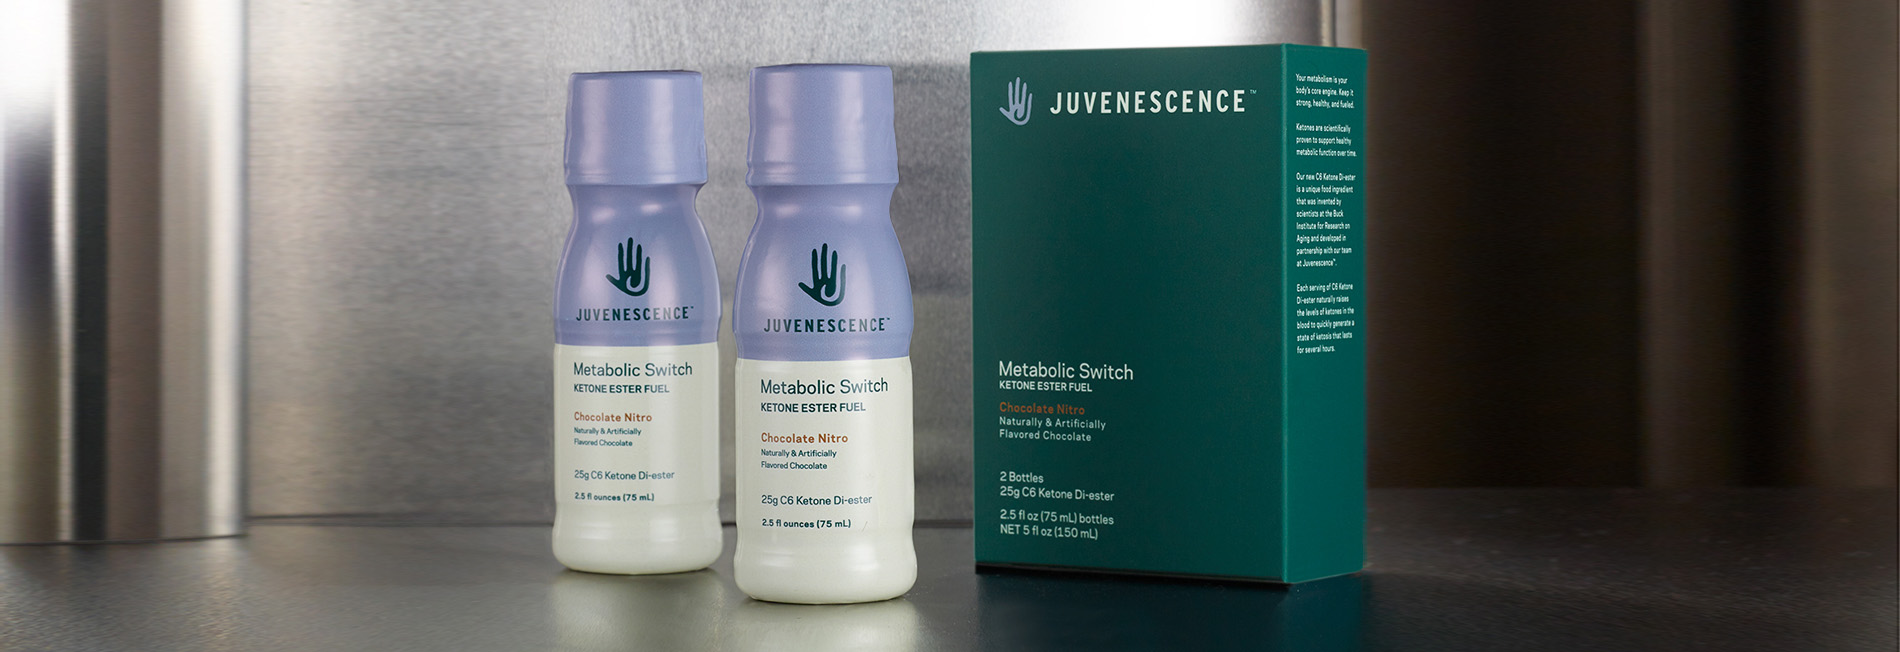 Juvenescence new product Metabolic Switch product and package